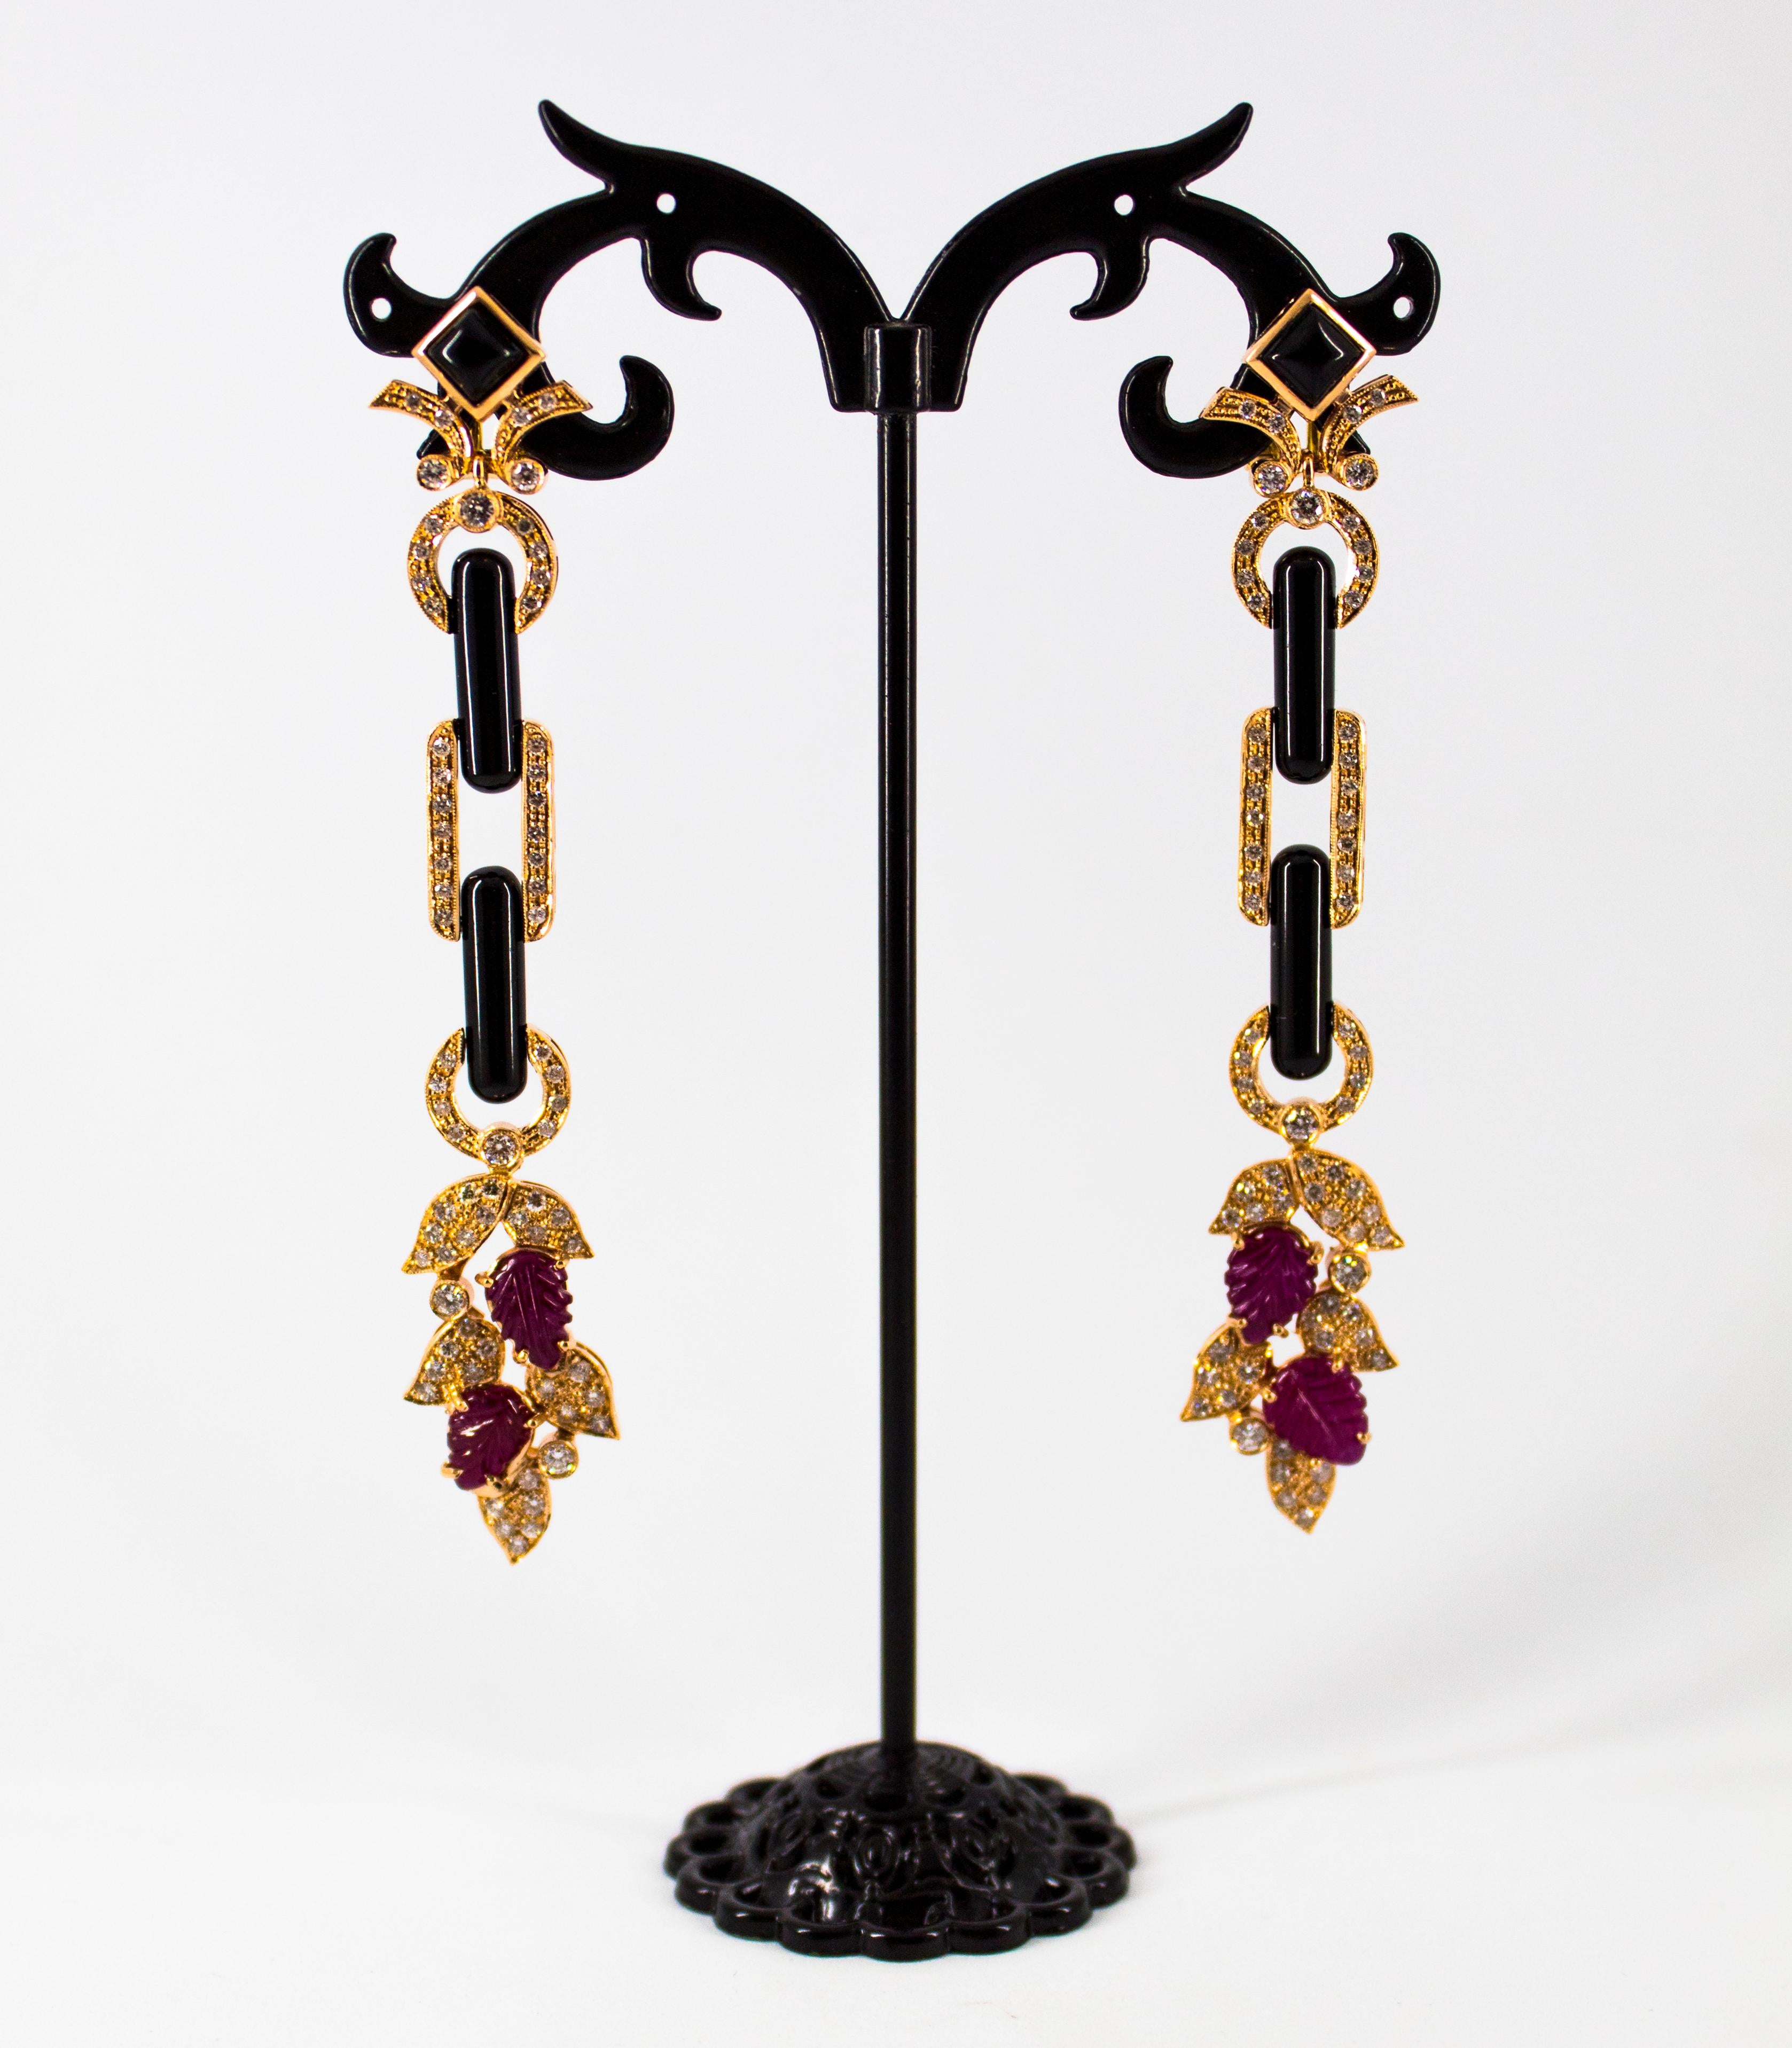 These Earrings are made of 14K Yellow Gold.
These Earrings have 1.76 Carats of White Diamonds.
These Earrings have 4.80 Carats of Rubies.
These Earrings have also Onyx.
All our Earrings have pins for pierced ears but we can change the closure and